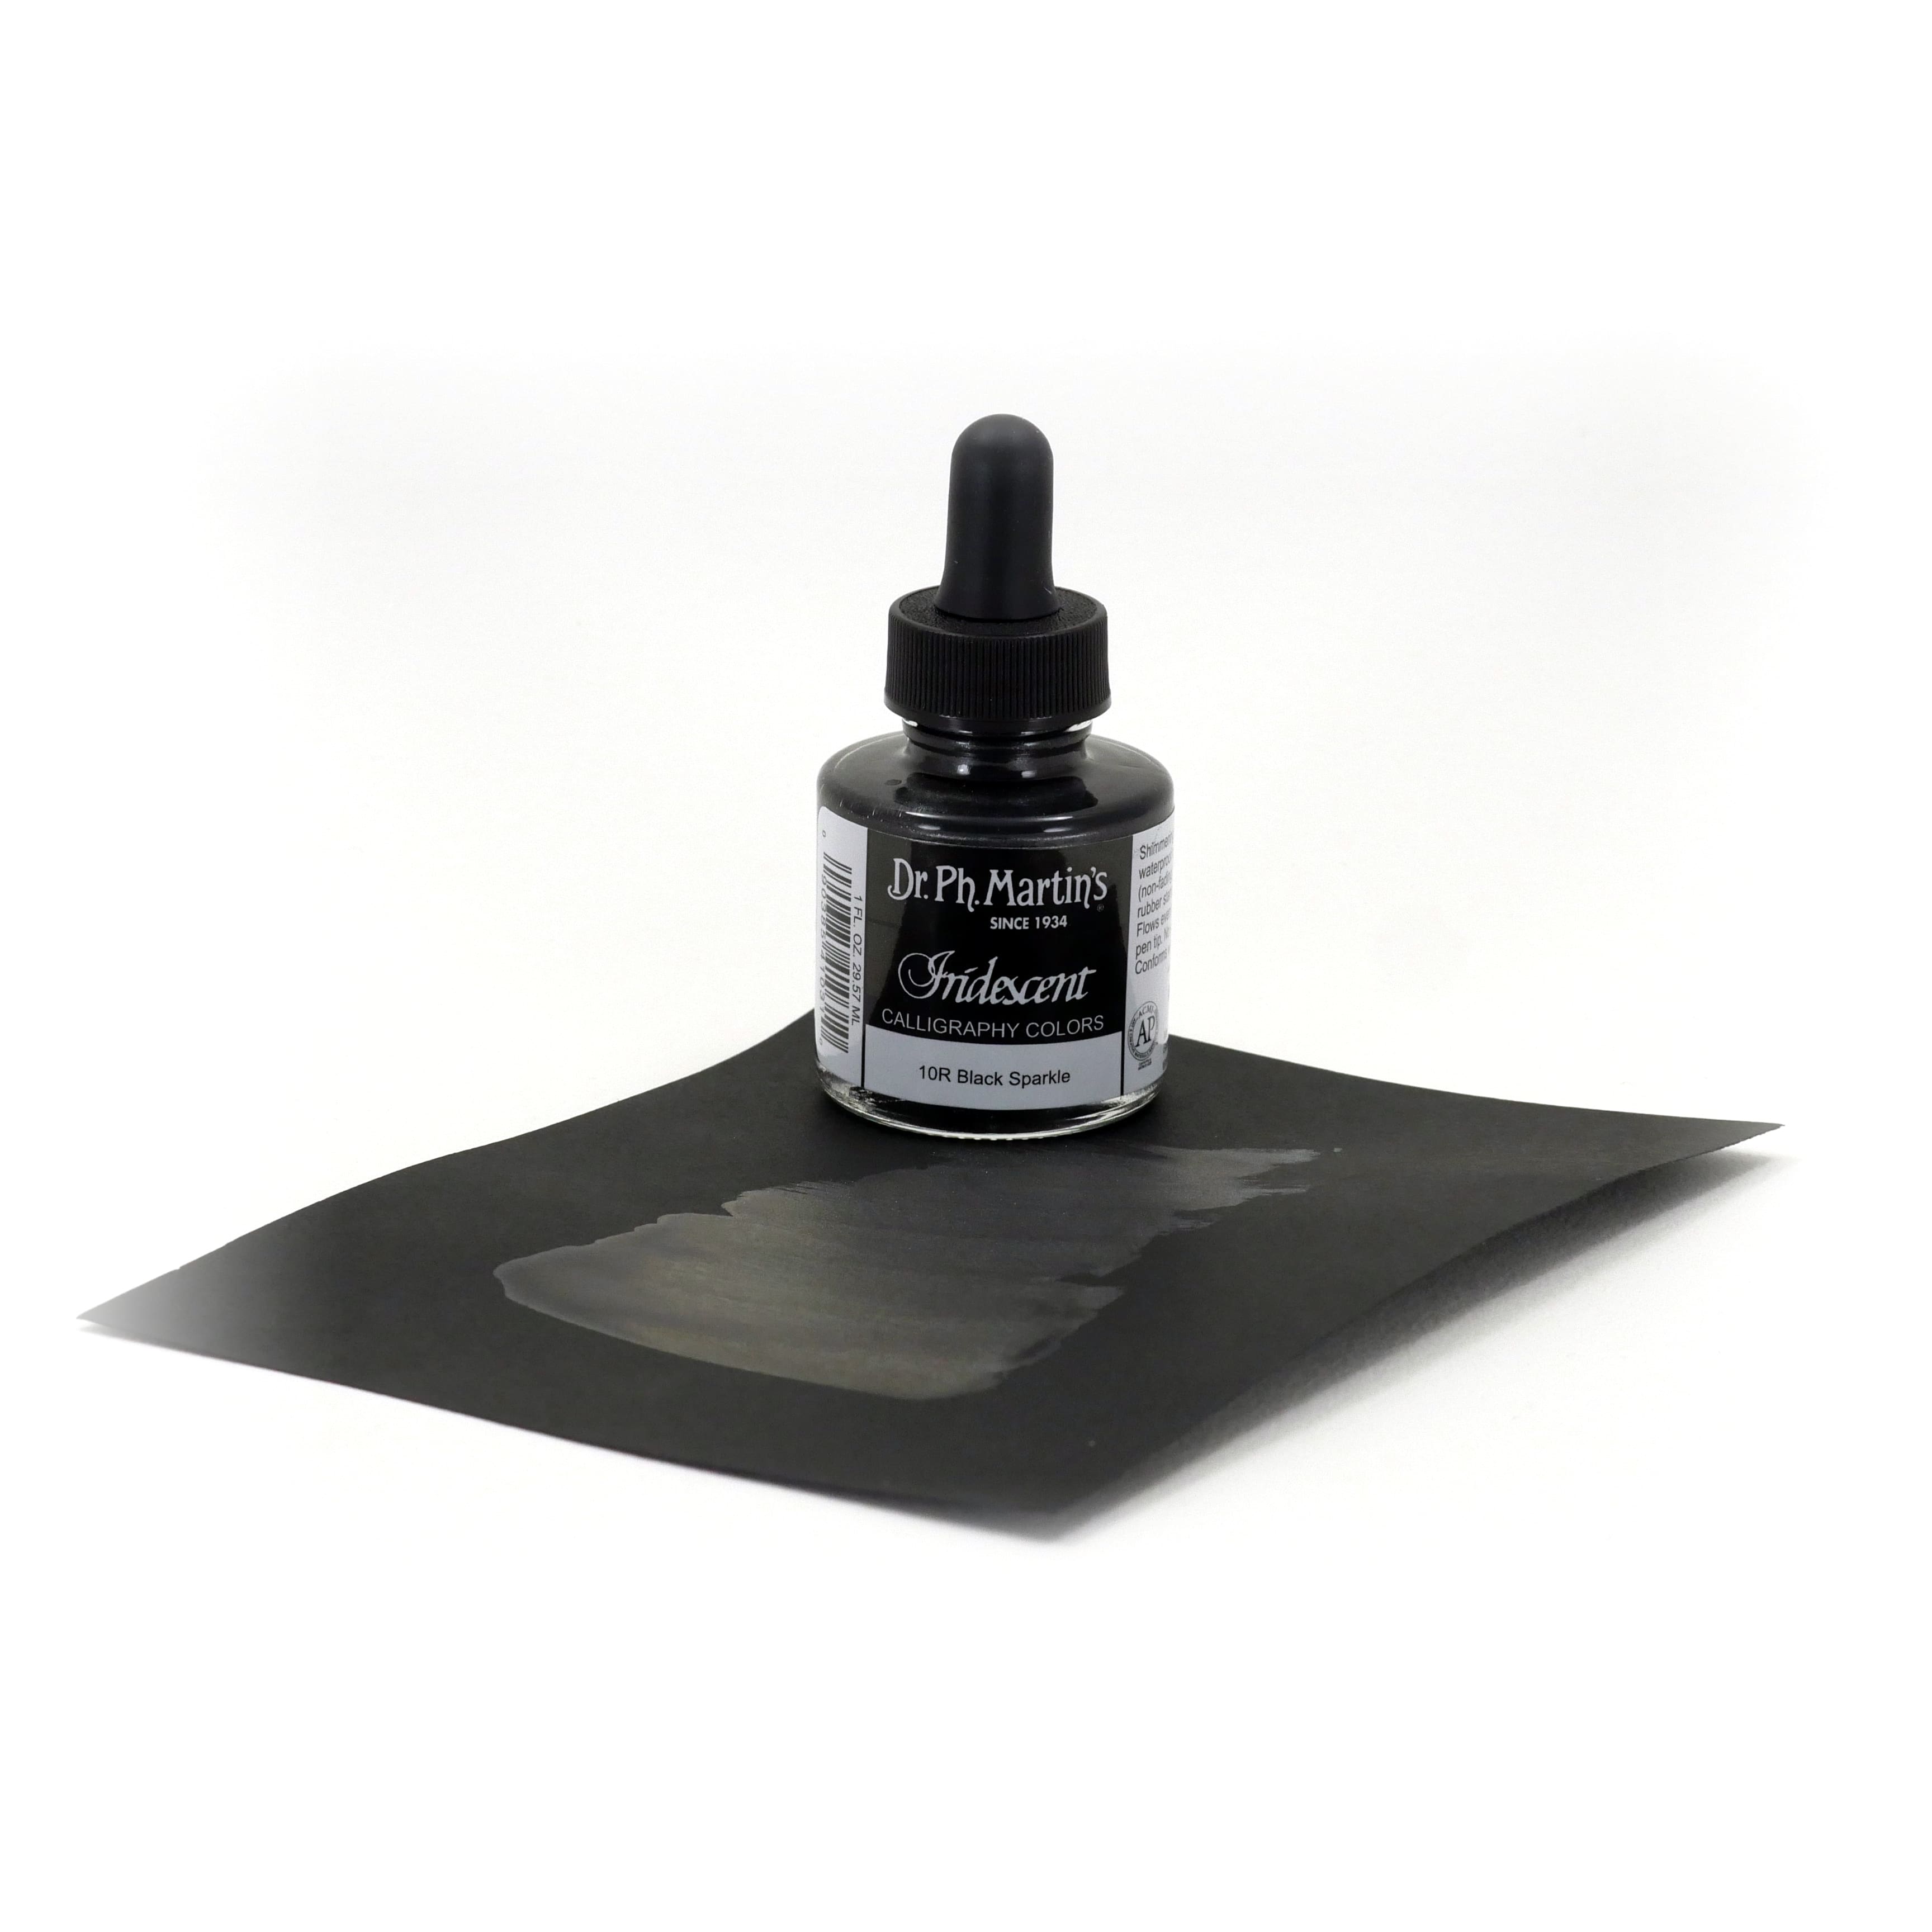 Dr. Ph. Martin&#x27;s&#xAE; Iridescent Calligraphy Color Ink